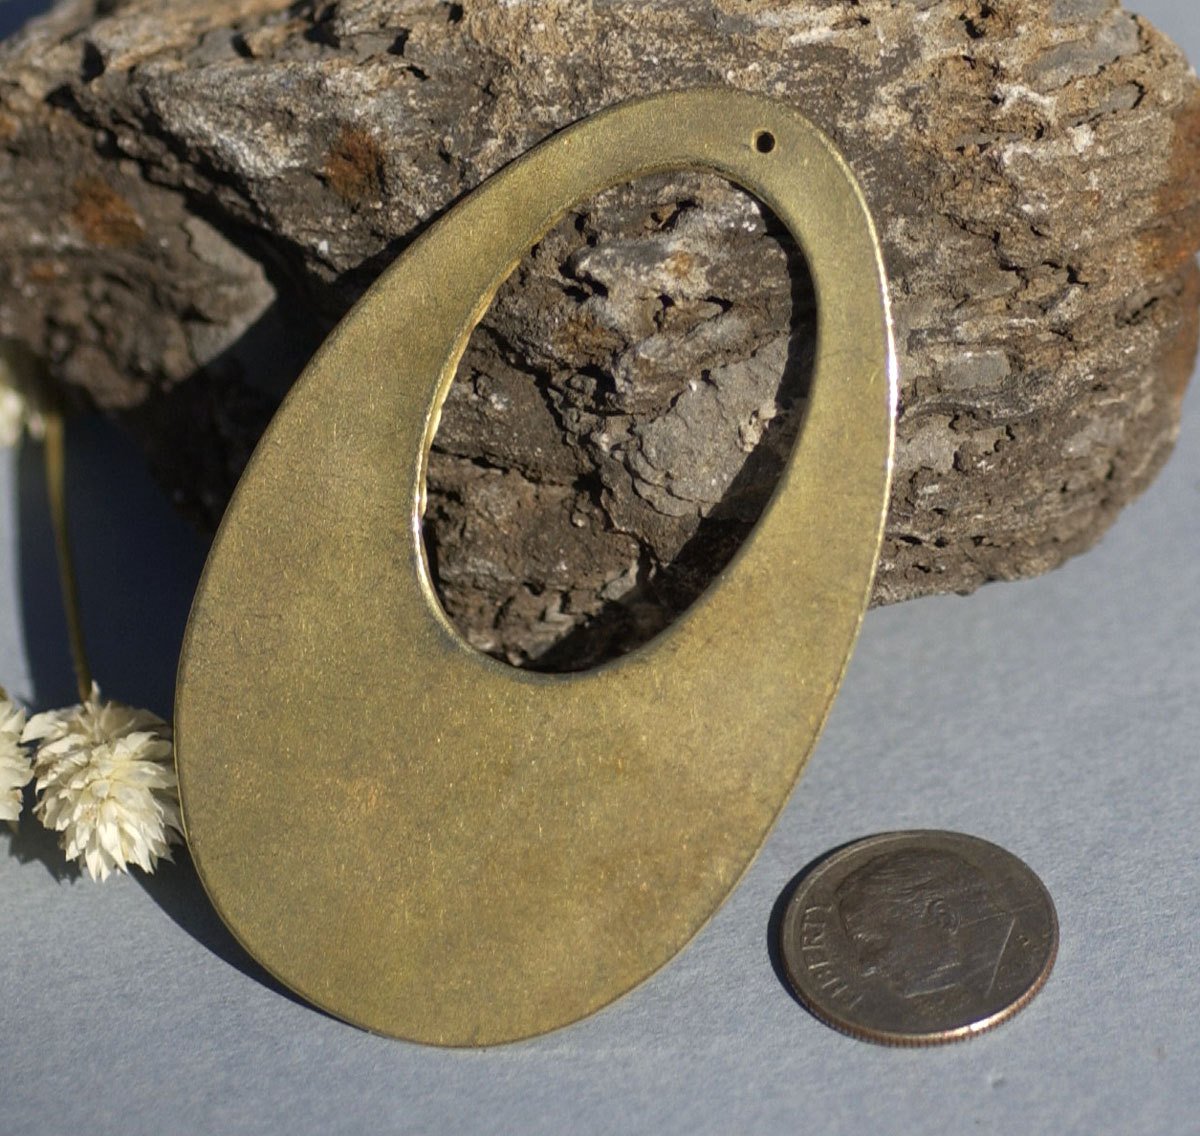 Brass Teardrop 65mm x 41mm Shape with Hole Cutout Blank for Stamping, Metalworking,Texturing, Soldering Blanks